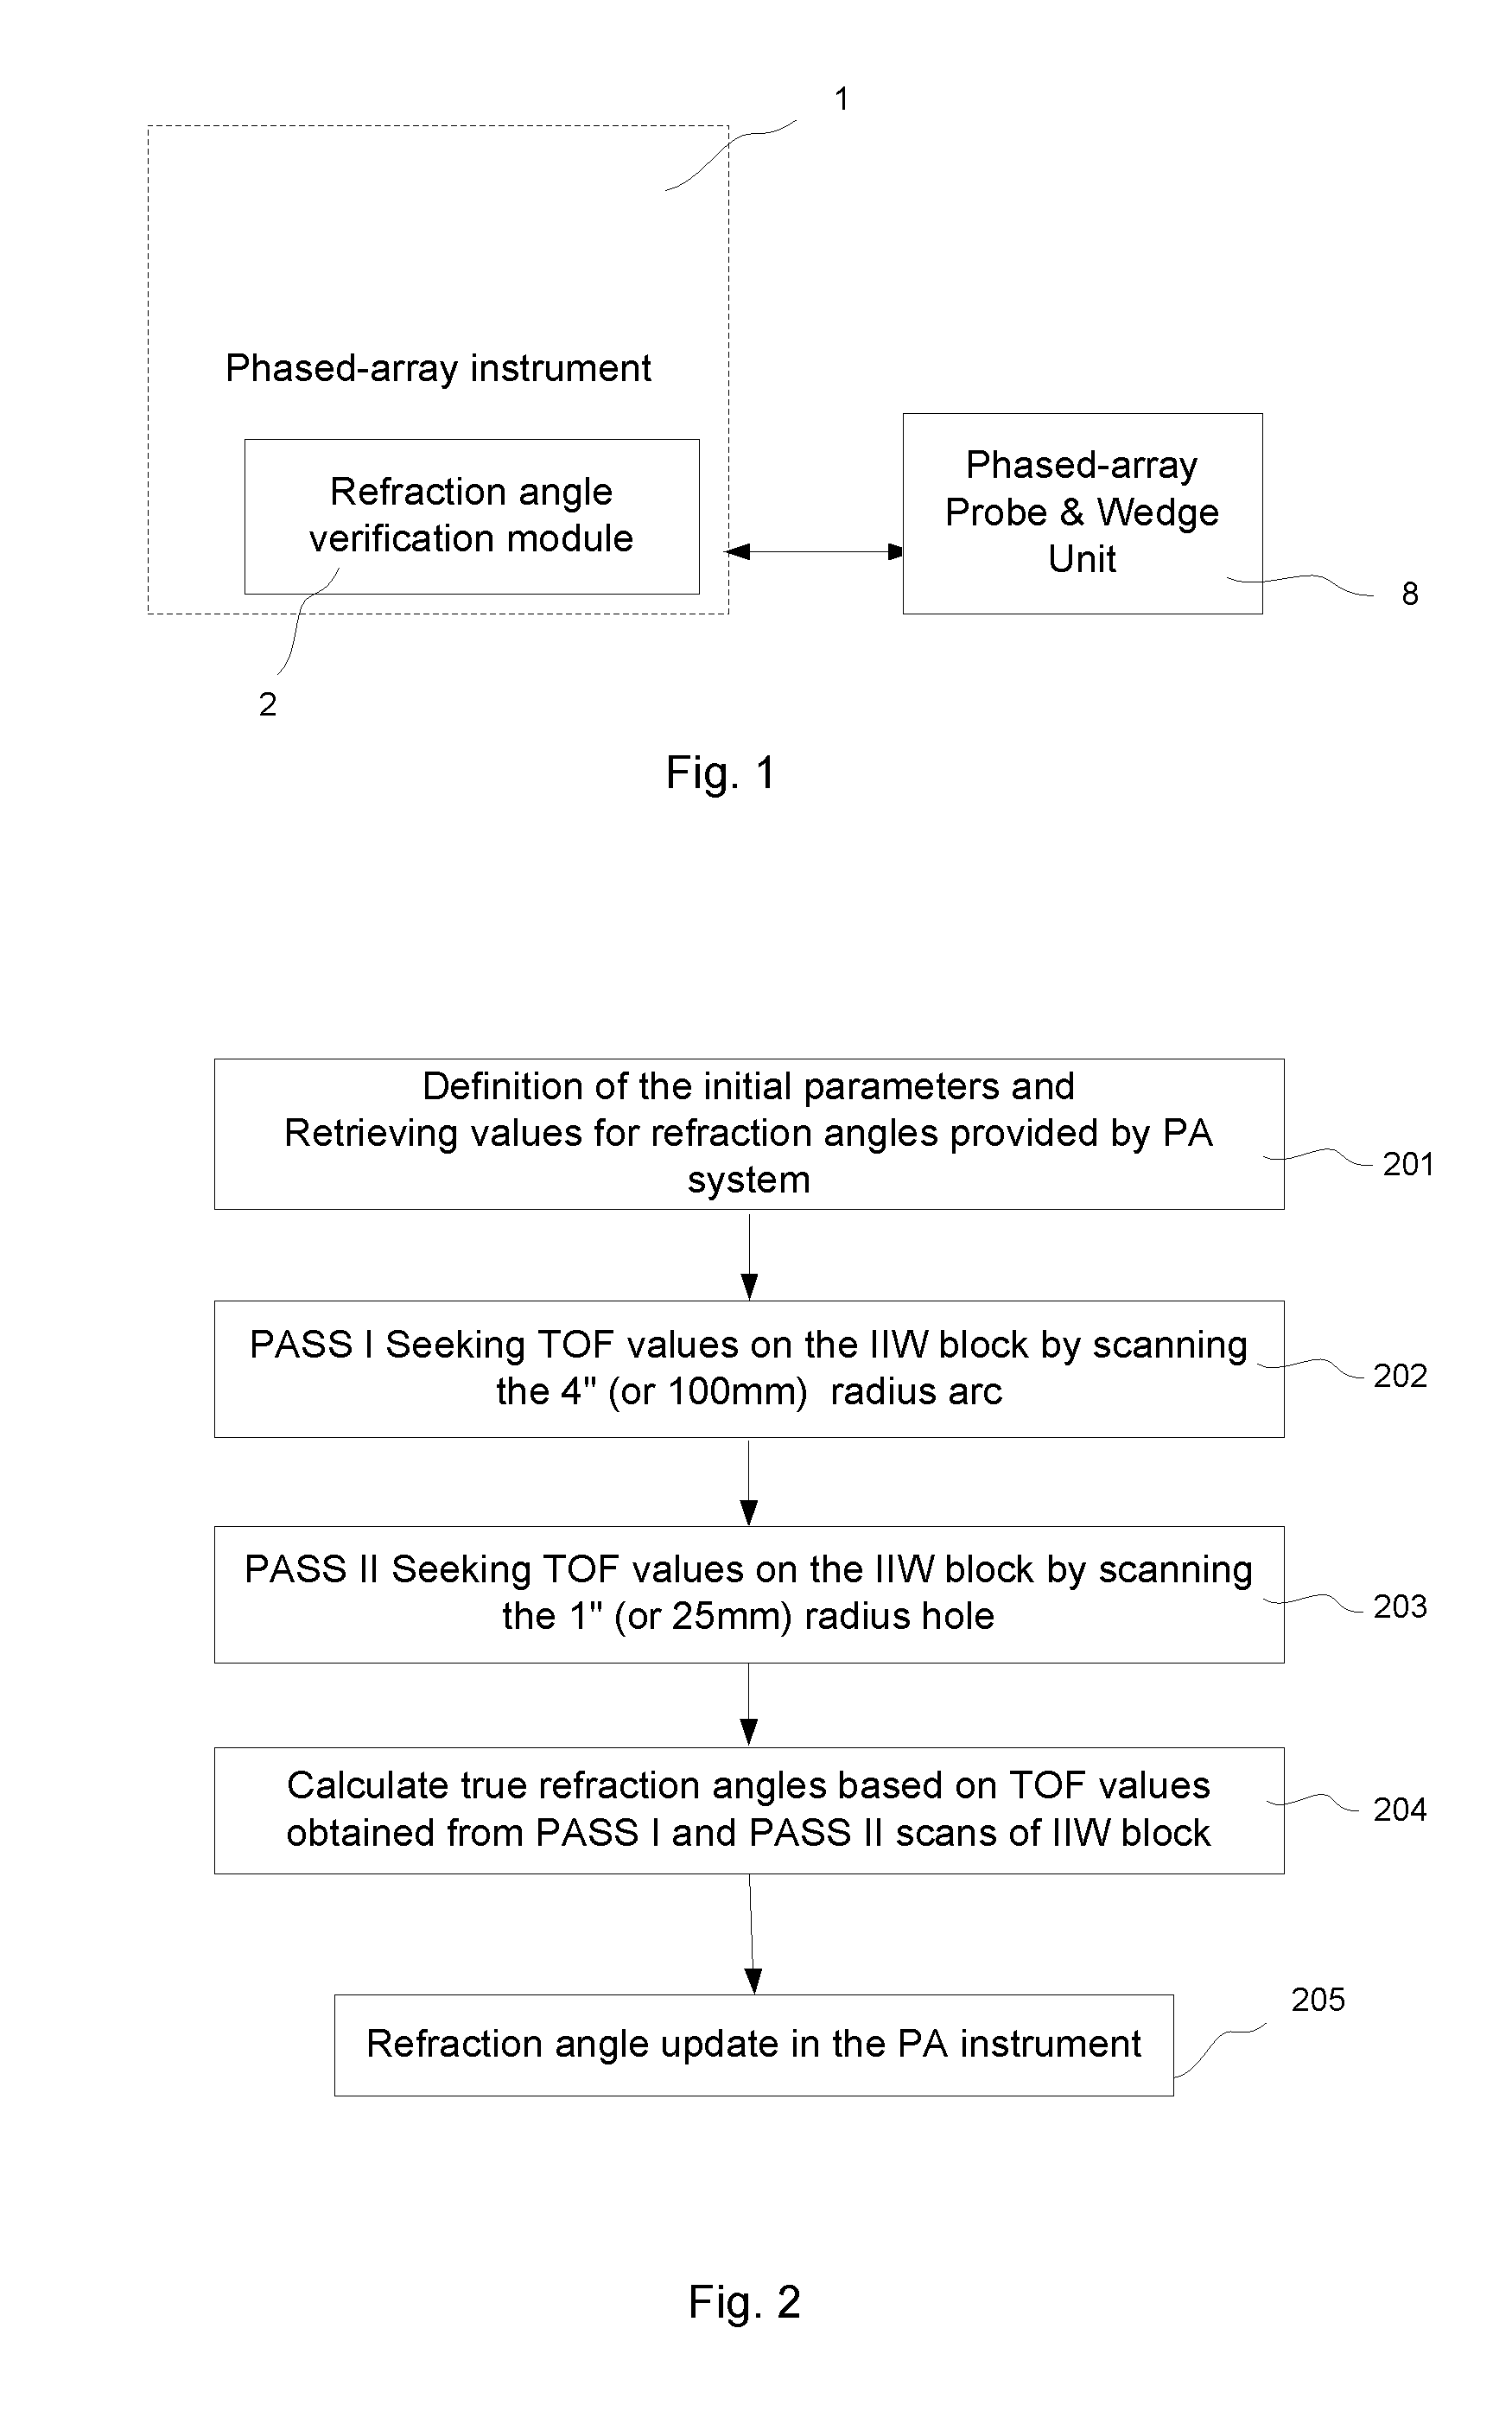 System and method of conducting refraction angle verification for phased array probes using standard calibration blocks